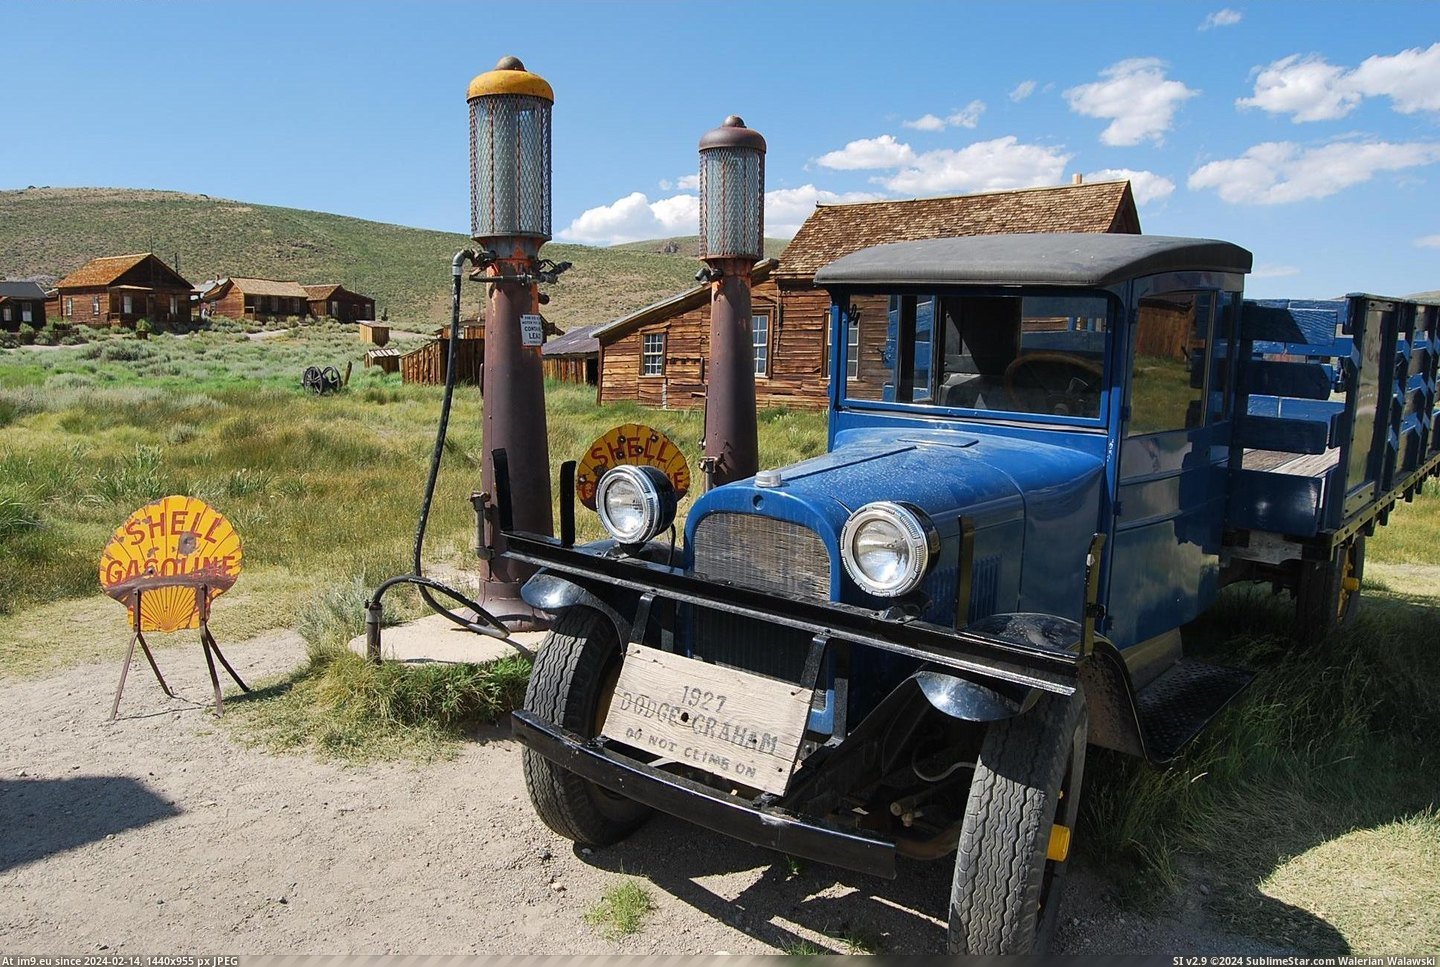 Bodiegasstop (in Bodie - a ghost town in Eastern California)